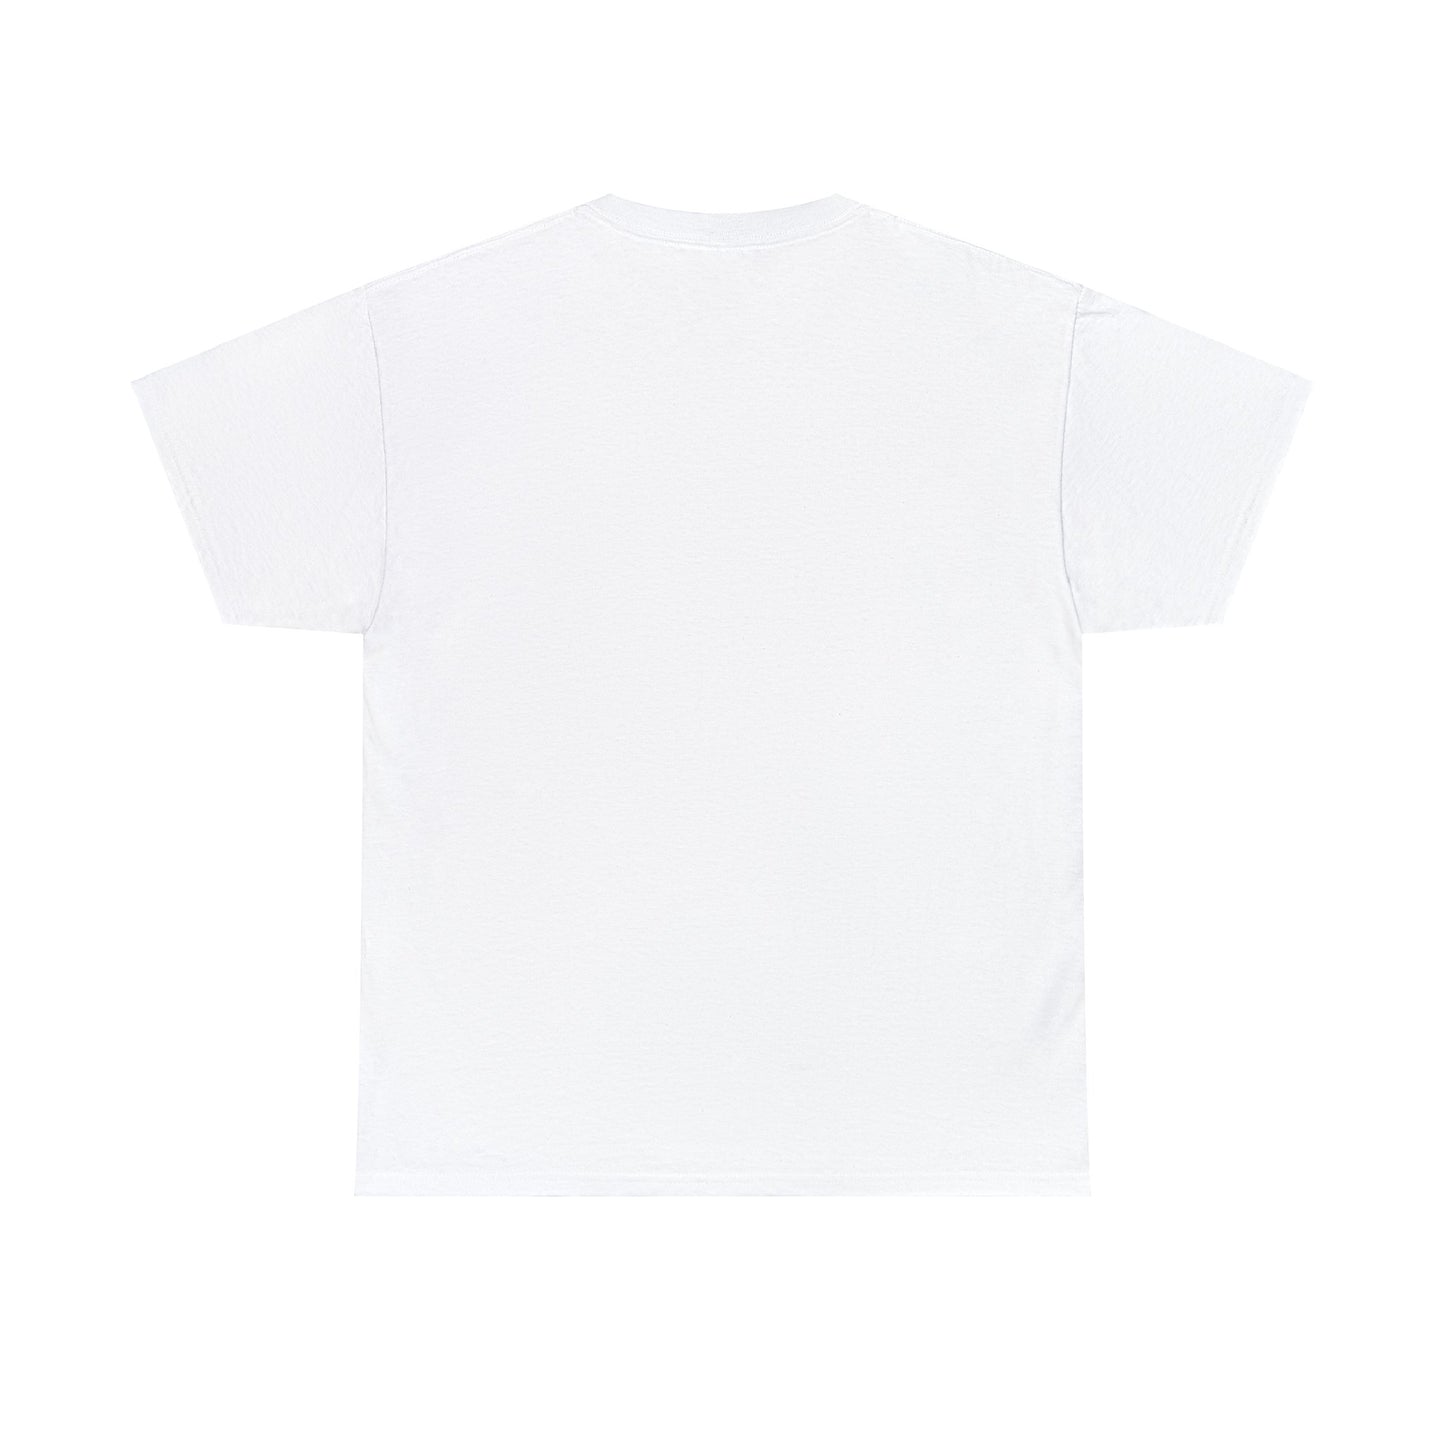 Dylan Camp Heavy Cotton Tee